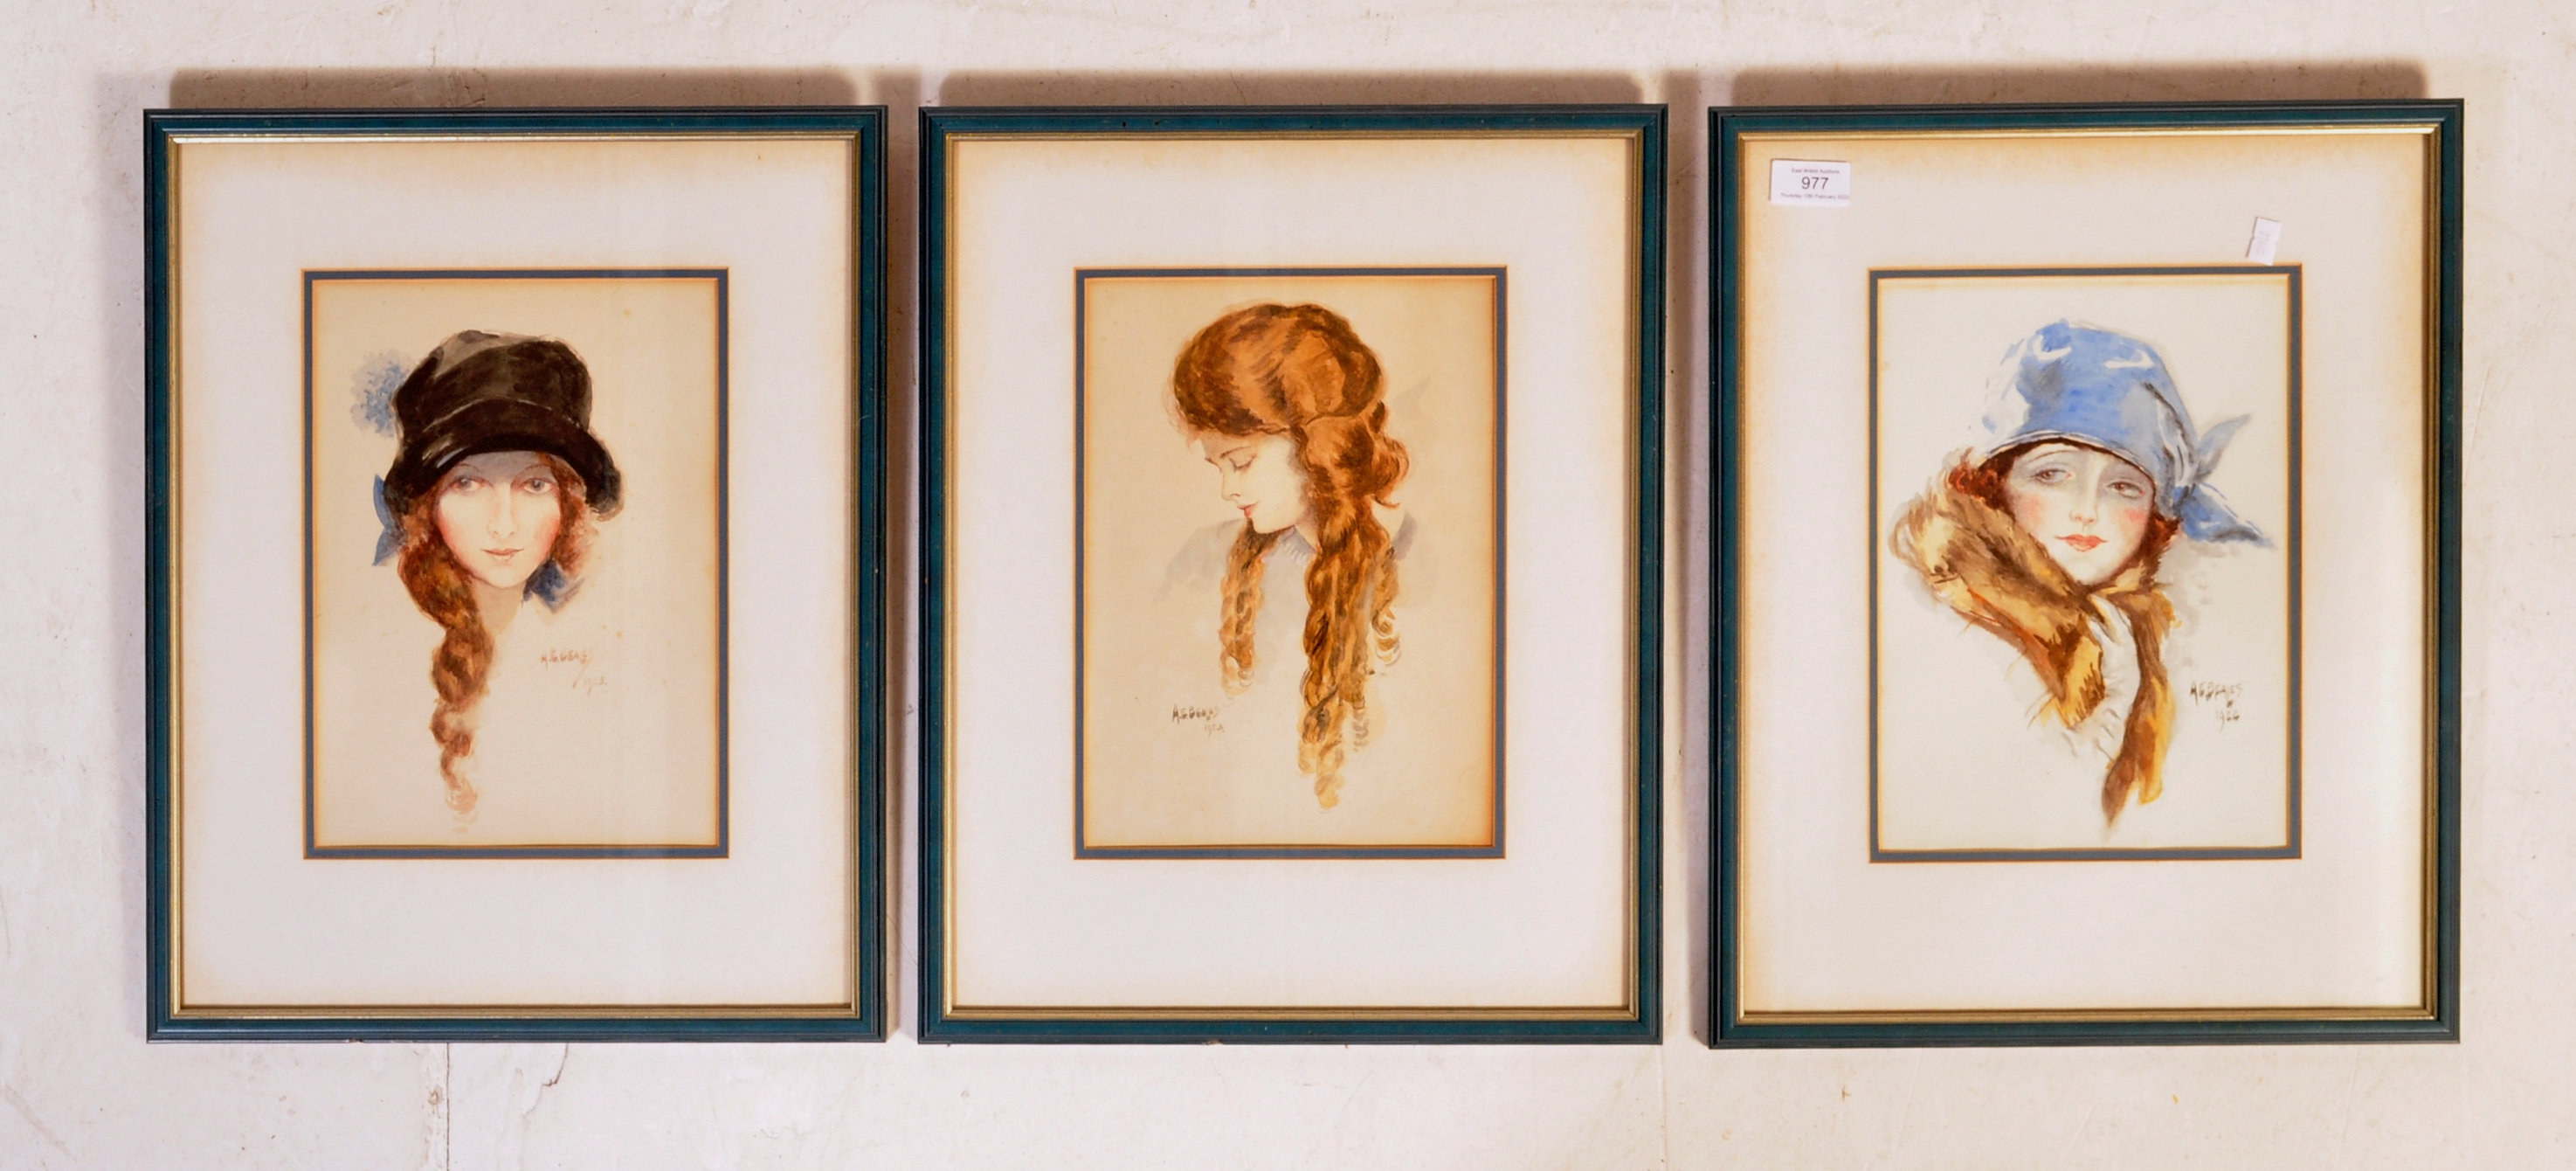 AE BEALES - SERIES OF 3 ART NOUVEAU WATERCOLOUR PAINTINGS - Image 2 of 12